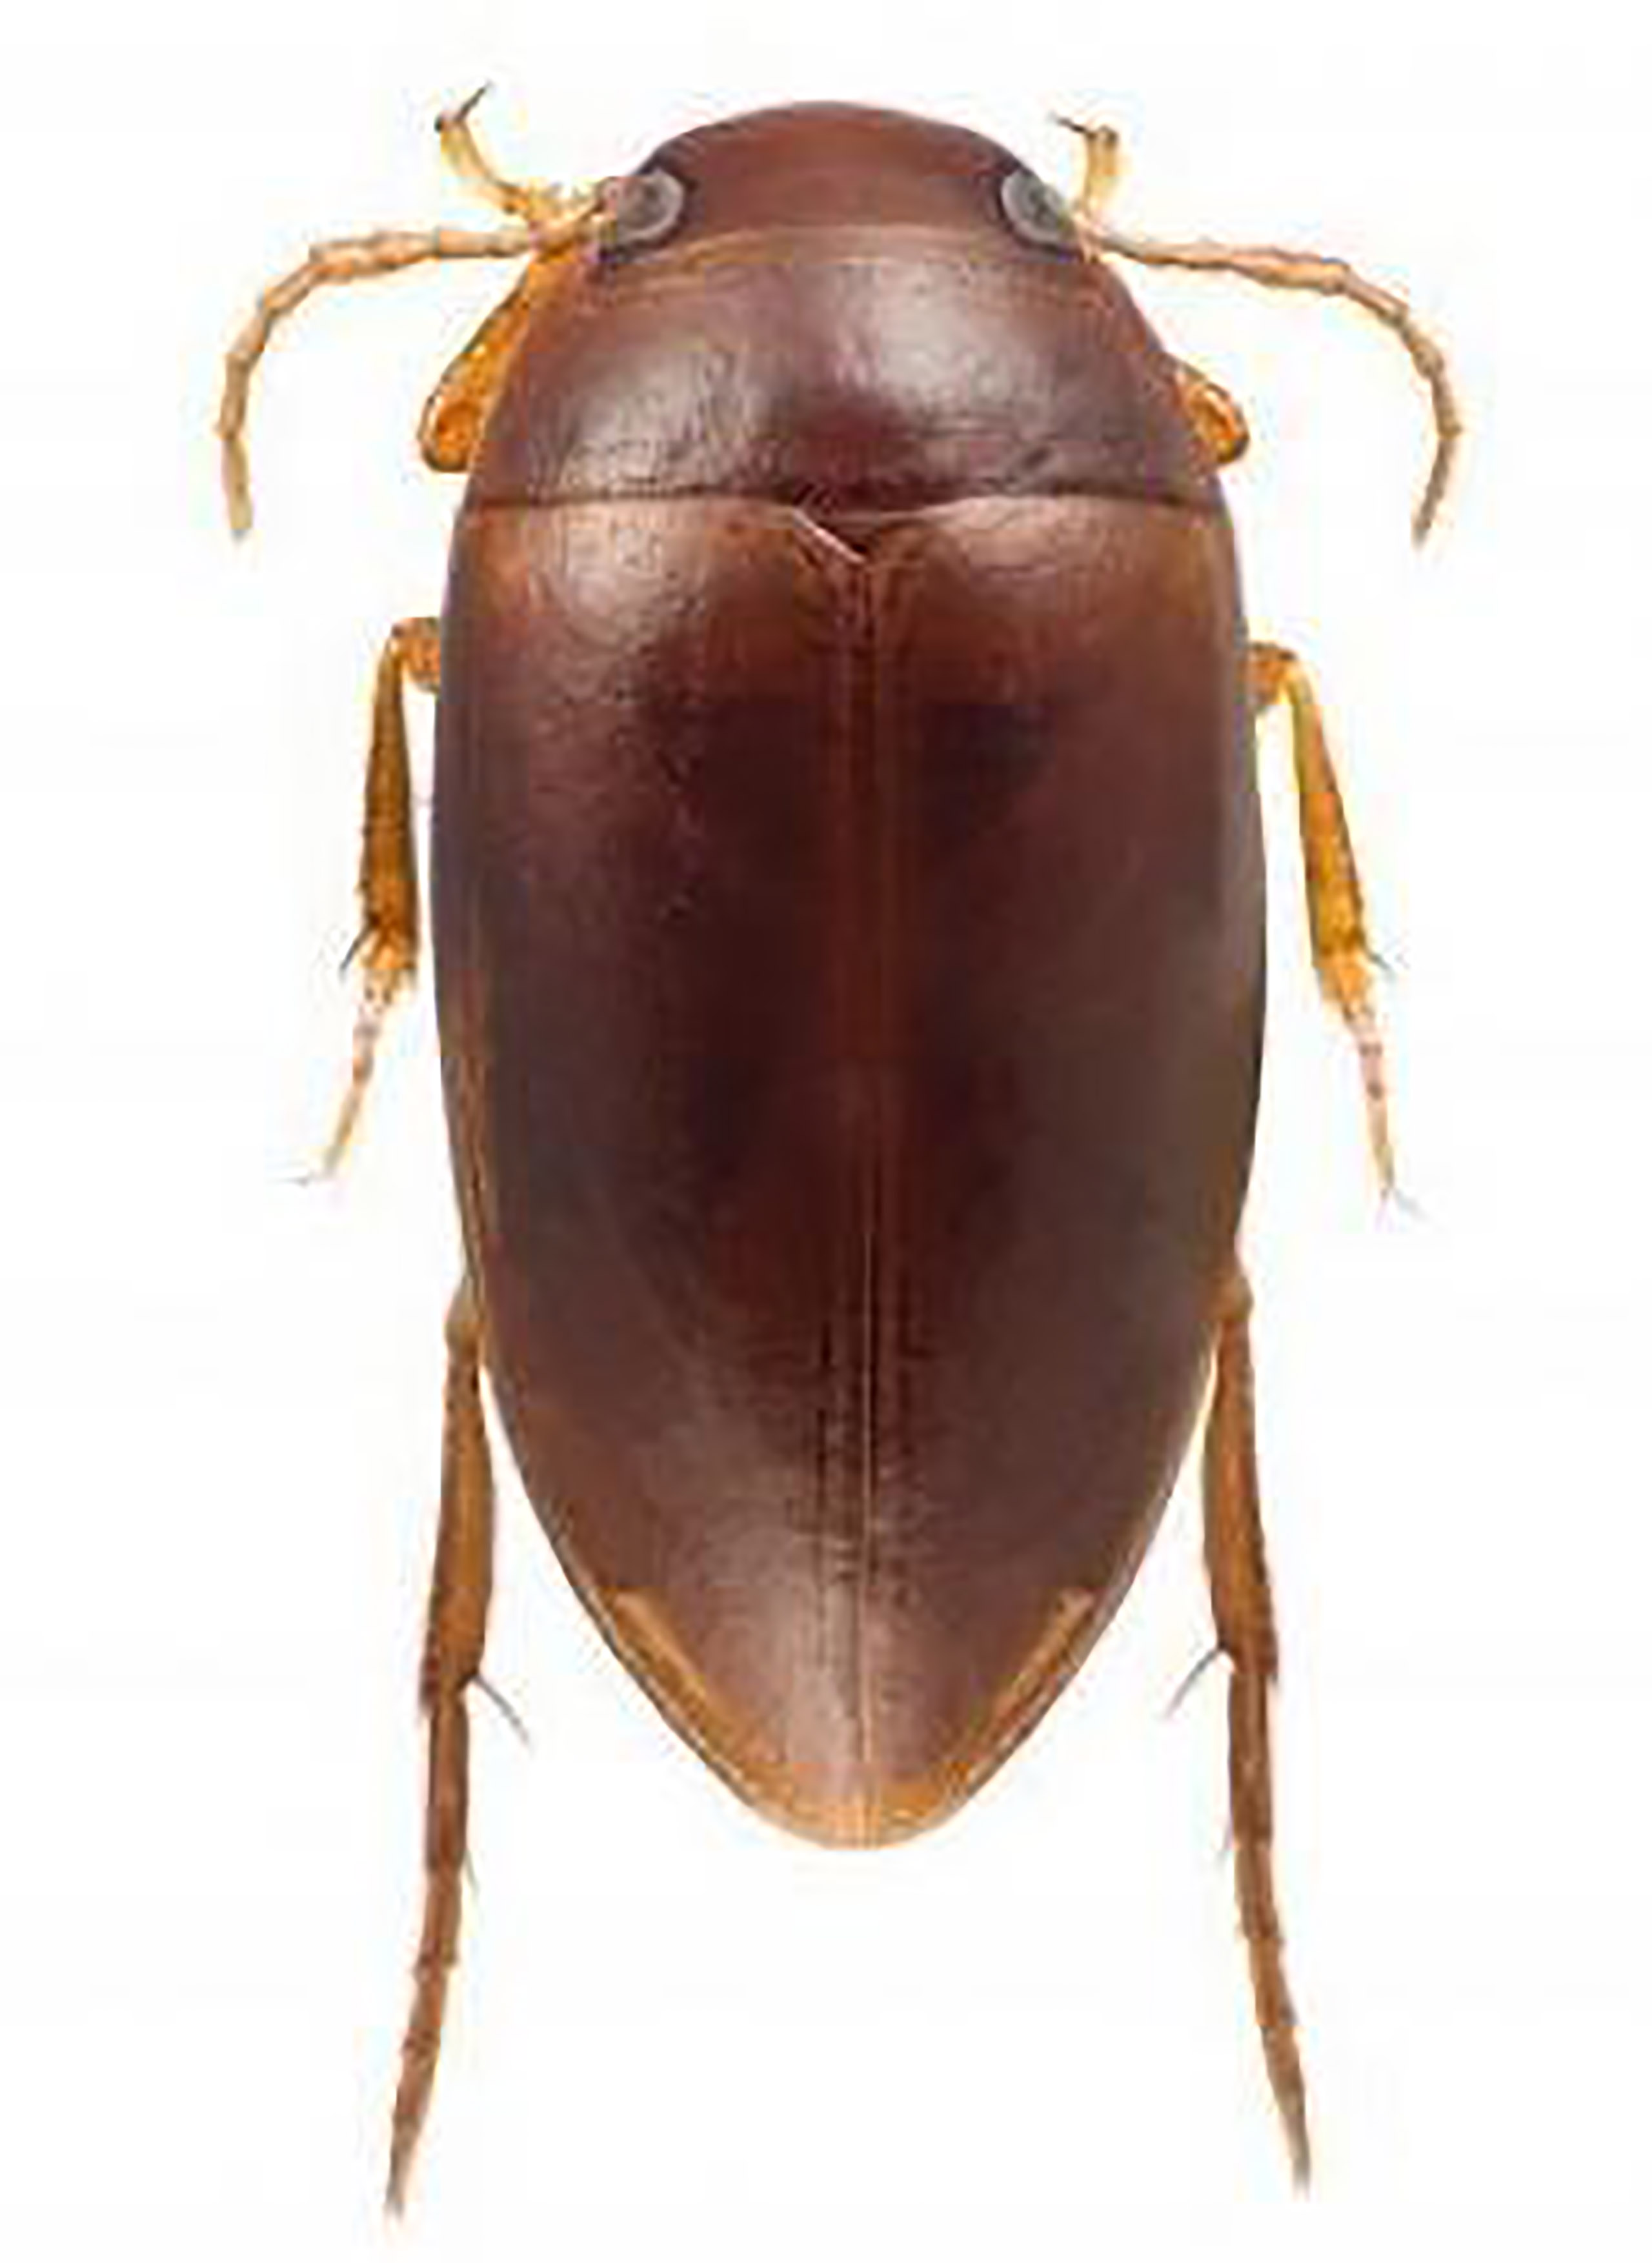 Agaporomorphus colberti: If a Venezuelan diving beetle could wear a hat, he’d tip it to his namesake Stephen Colbert. It’s not the first time the leader of Colbert Nation has had his name attached to something. In 2009, NASA invited the public to vote online for the name of a new module on the International Space Station. Colbert wasn’t on the list, but he won in a write-in landslide. The space agency compromised with the Colbert exercise treadmill, housed in the properly named Tranquility module.